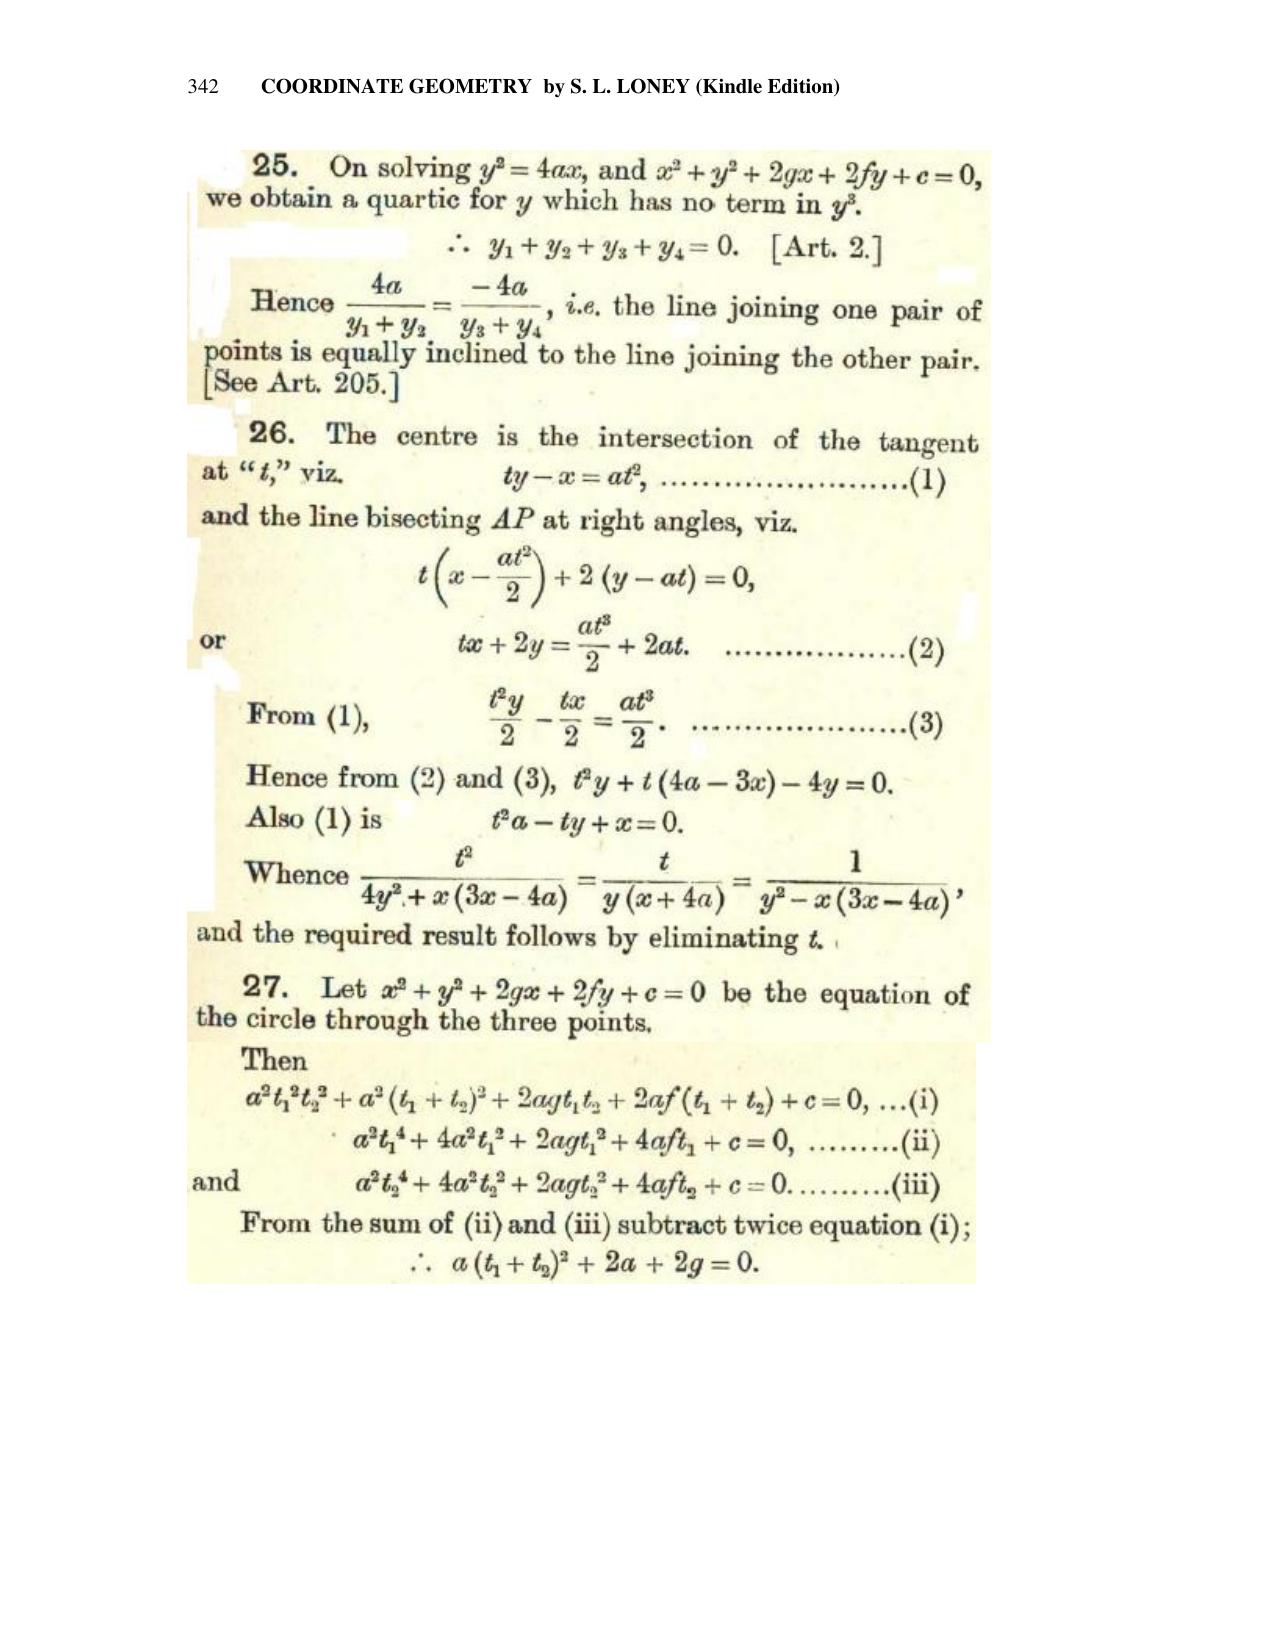 Chapter 10: The Parabola - SL Loney Solutions: The Elements of Coordinate Geometry - Page 56